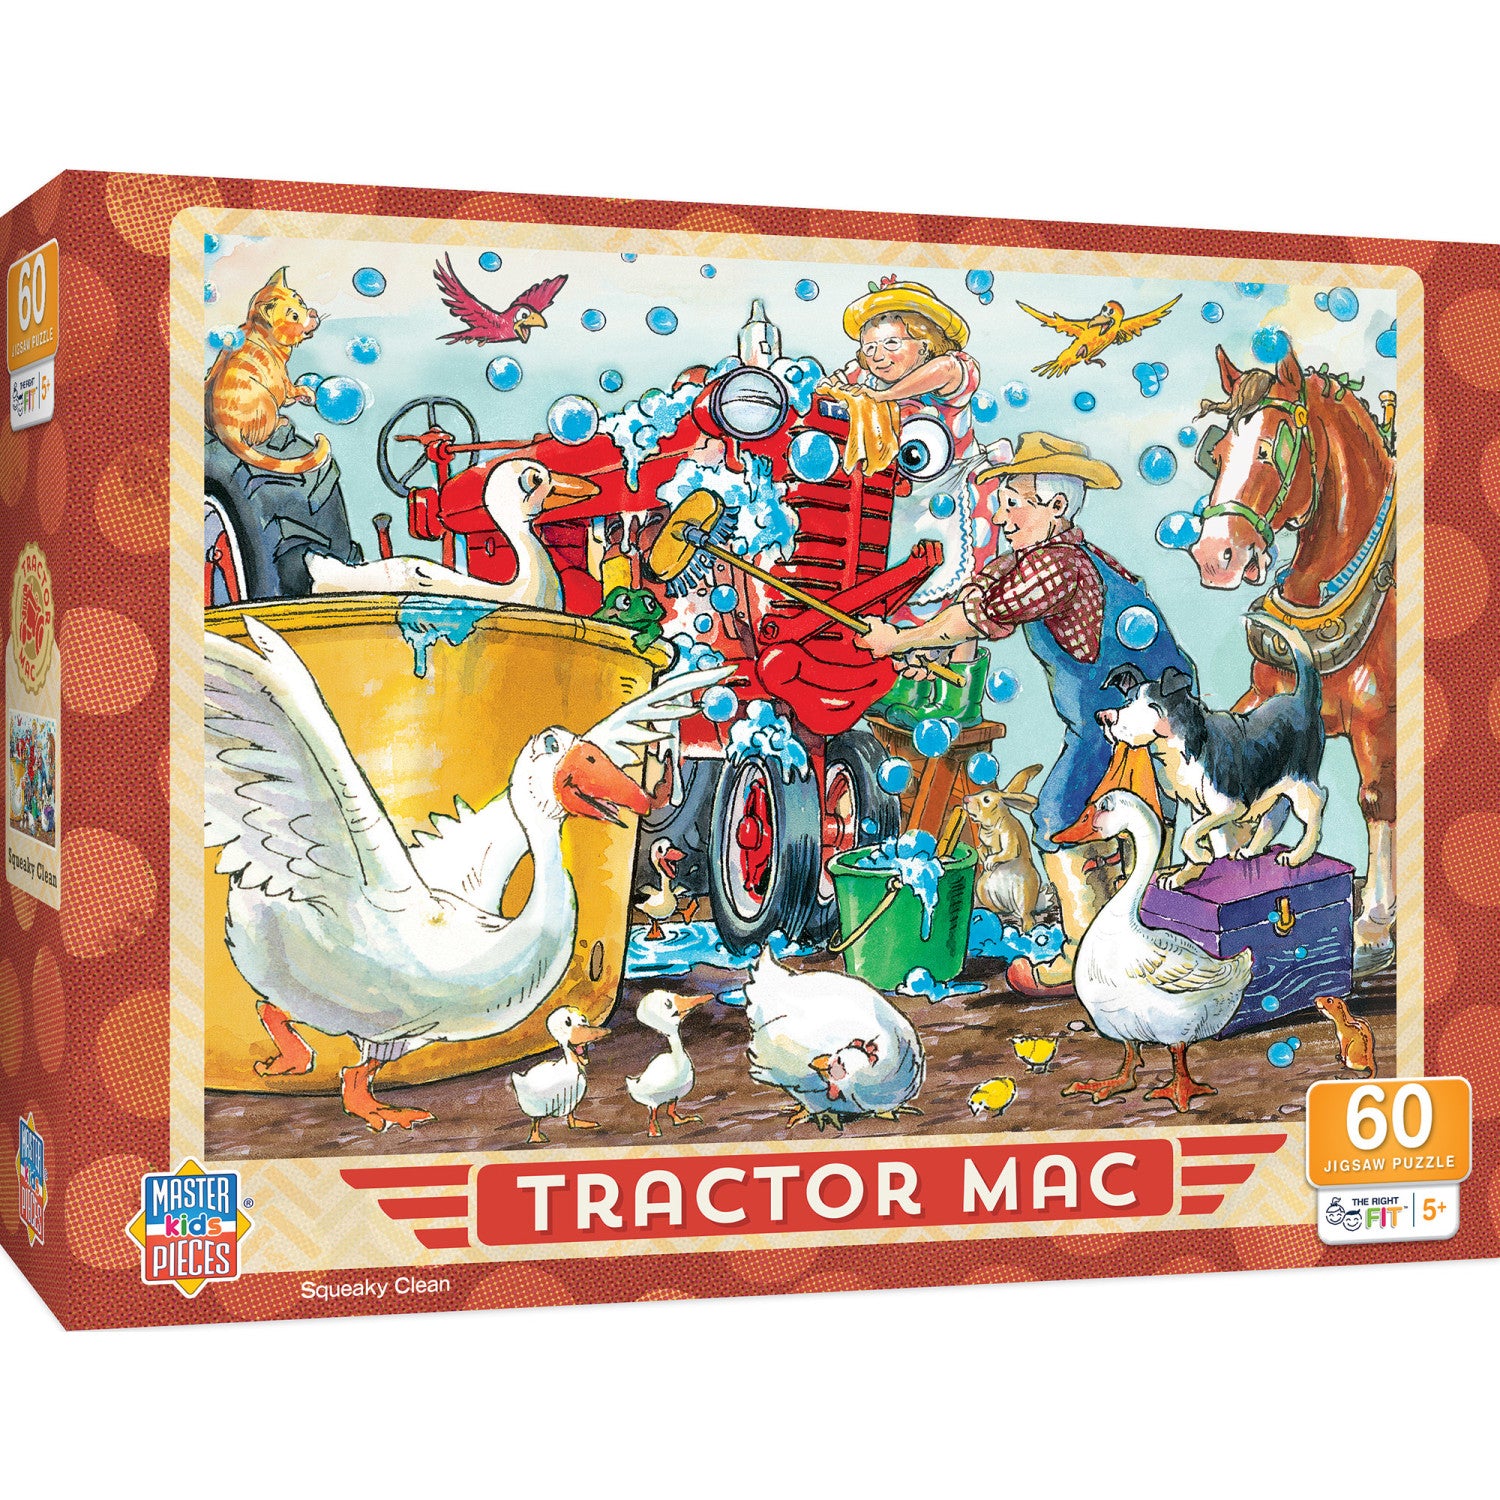 Tractor Mac - Squeeky Clean 60 Piece Jigsaw Puzzle